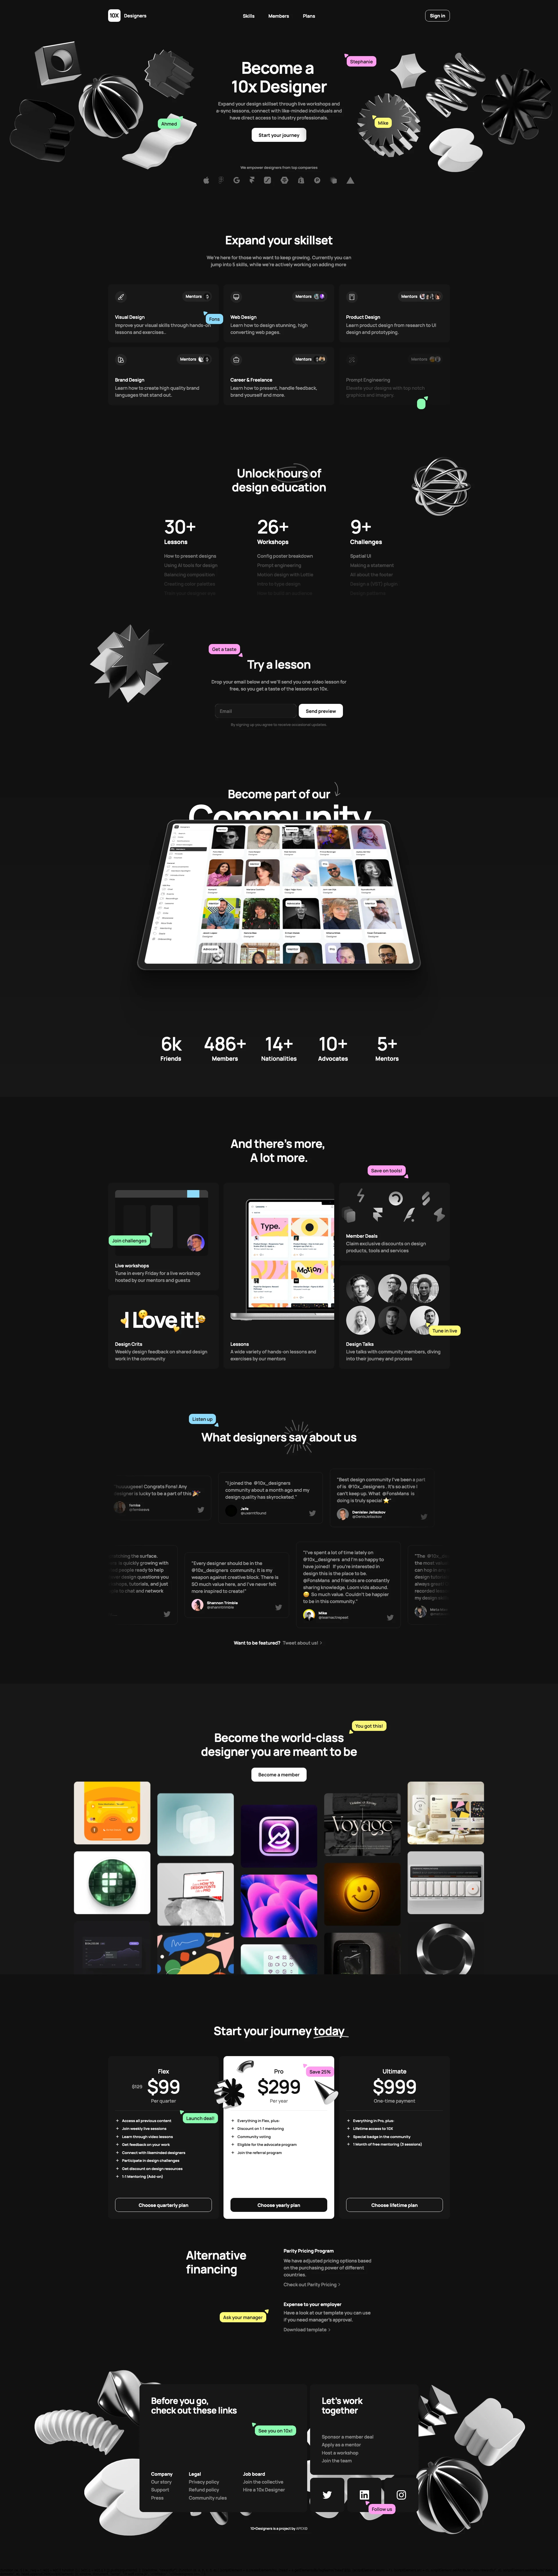 10x Designers Landing Page Example: Expand your brand, product, visual and web design skillset through live workshops and a-sync lessons, connect with like-minded individuals and get direct access to industry professionals.